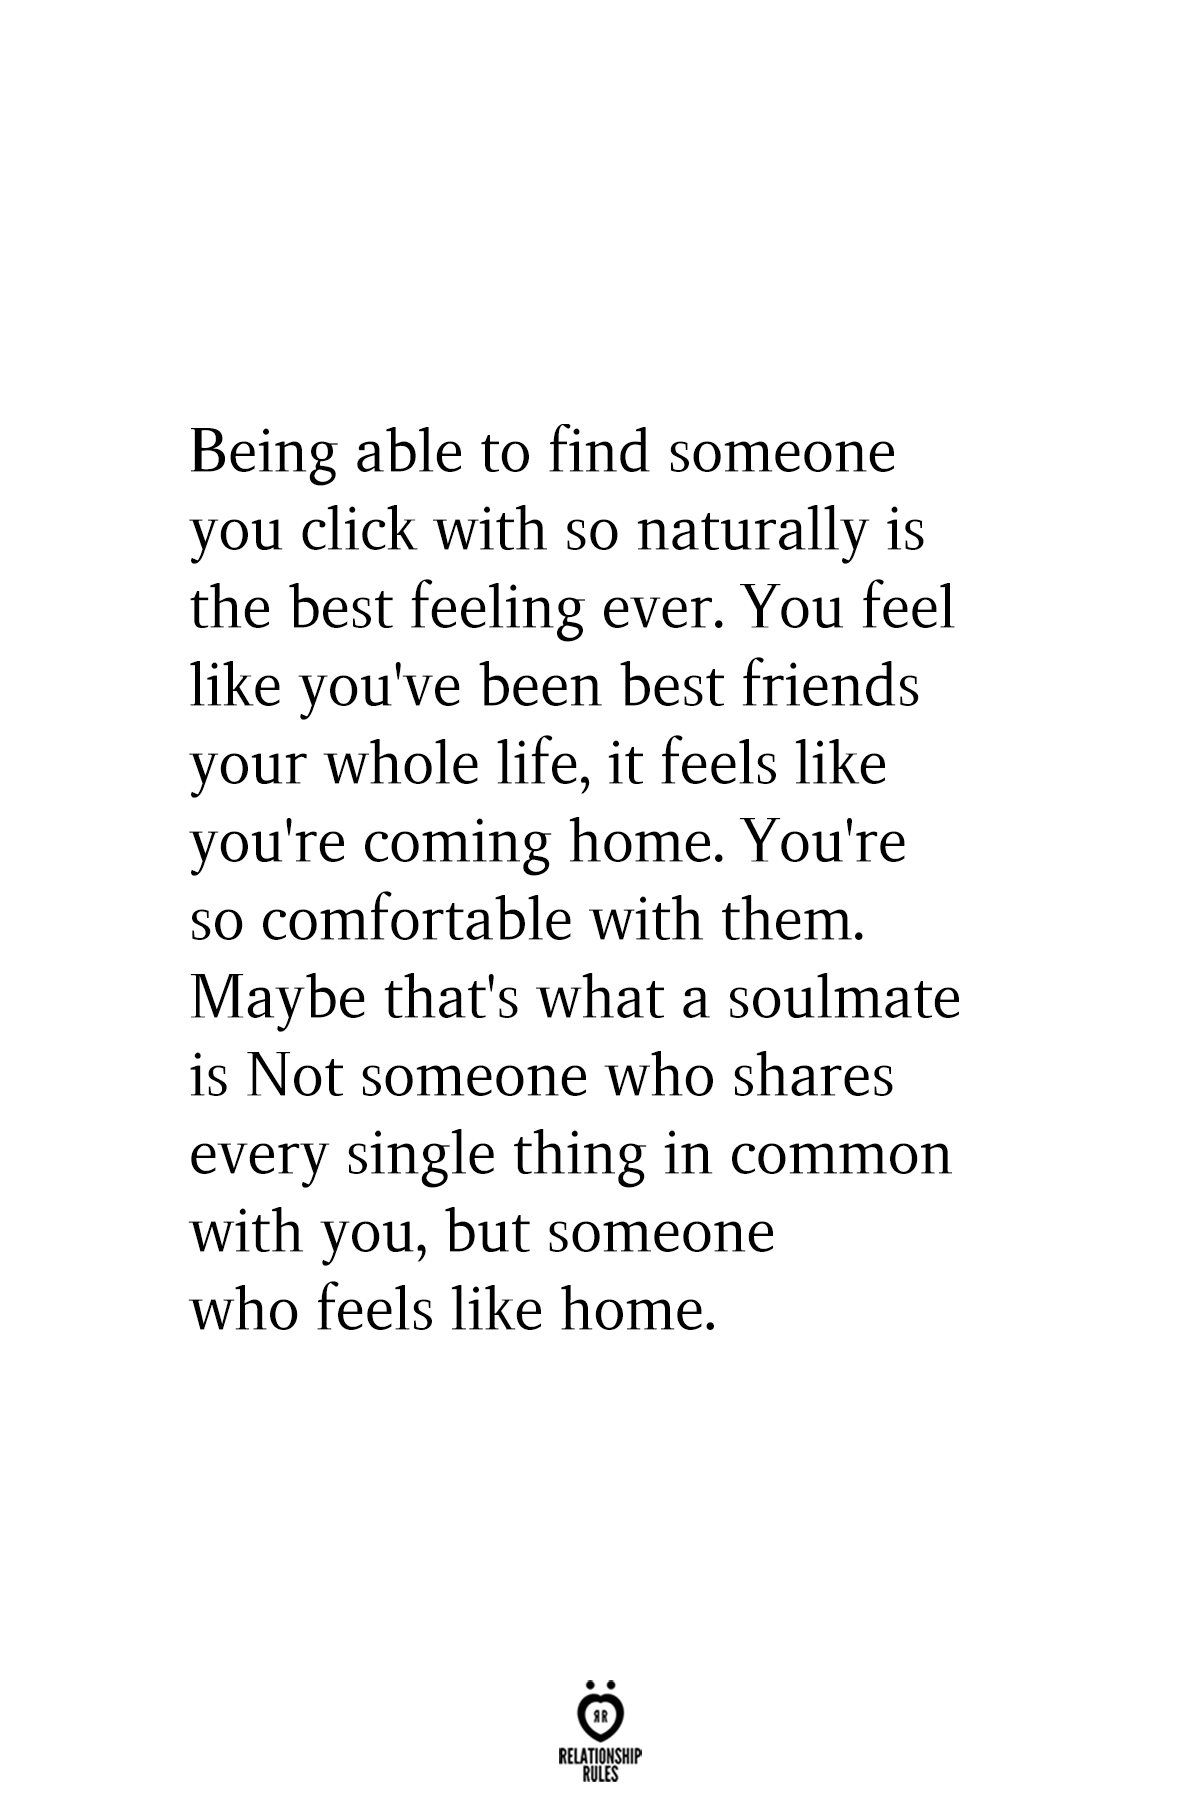 Being able to find someone you click with so naturally is the best feeling ever - Being able to find someone you click with so naturally is the best feeling ever -   16 beauty Life with you ideas